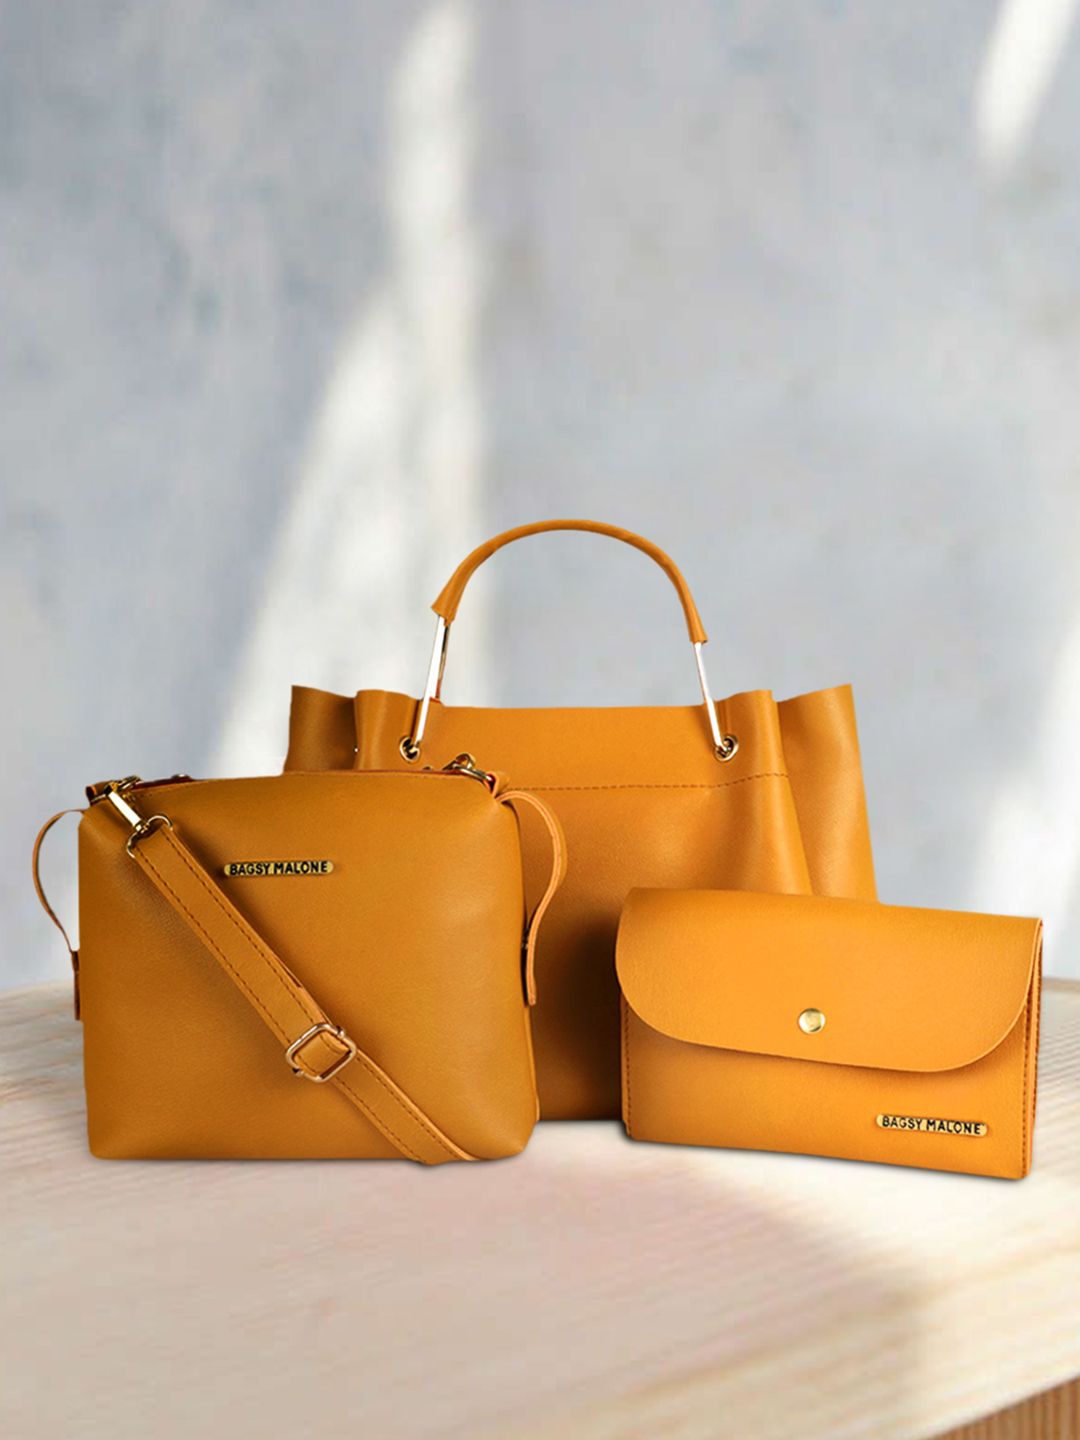 Bagsy Malone Mustard Yellow Solid Handheld Bag with Sling Bag and Clutch Price in India